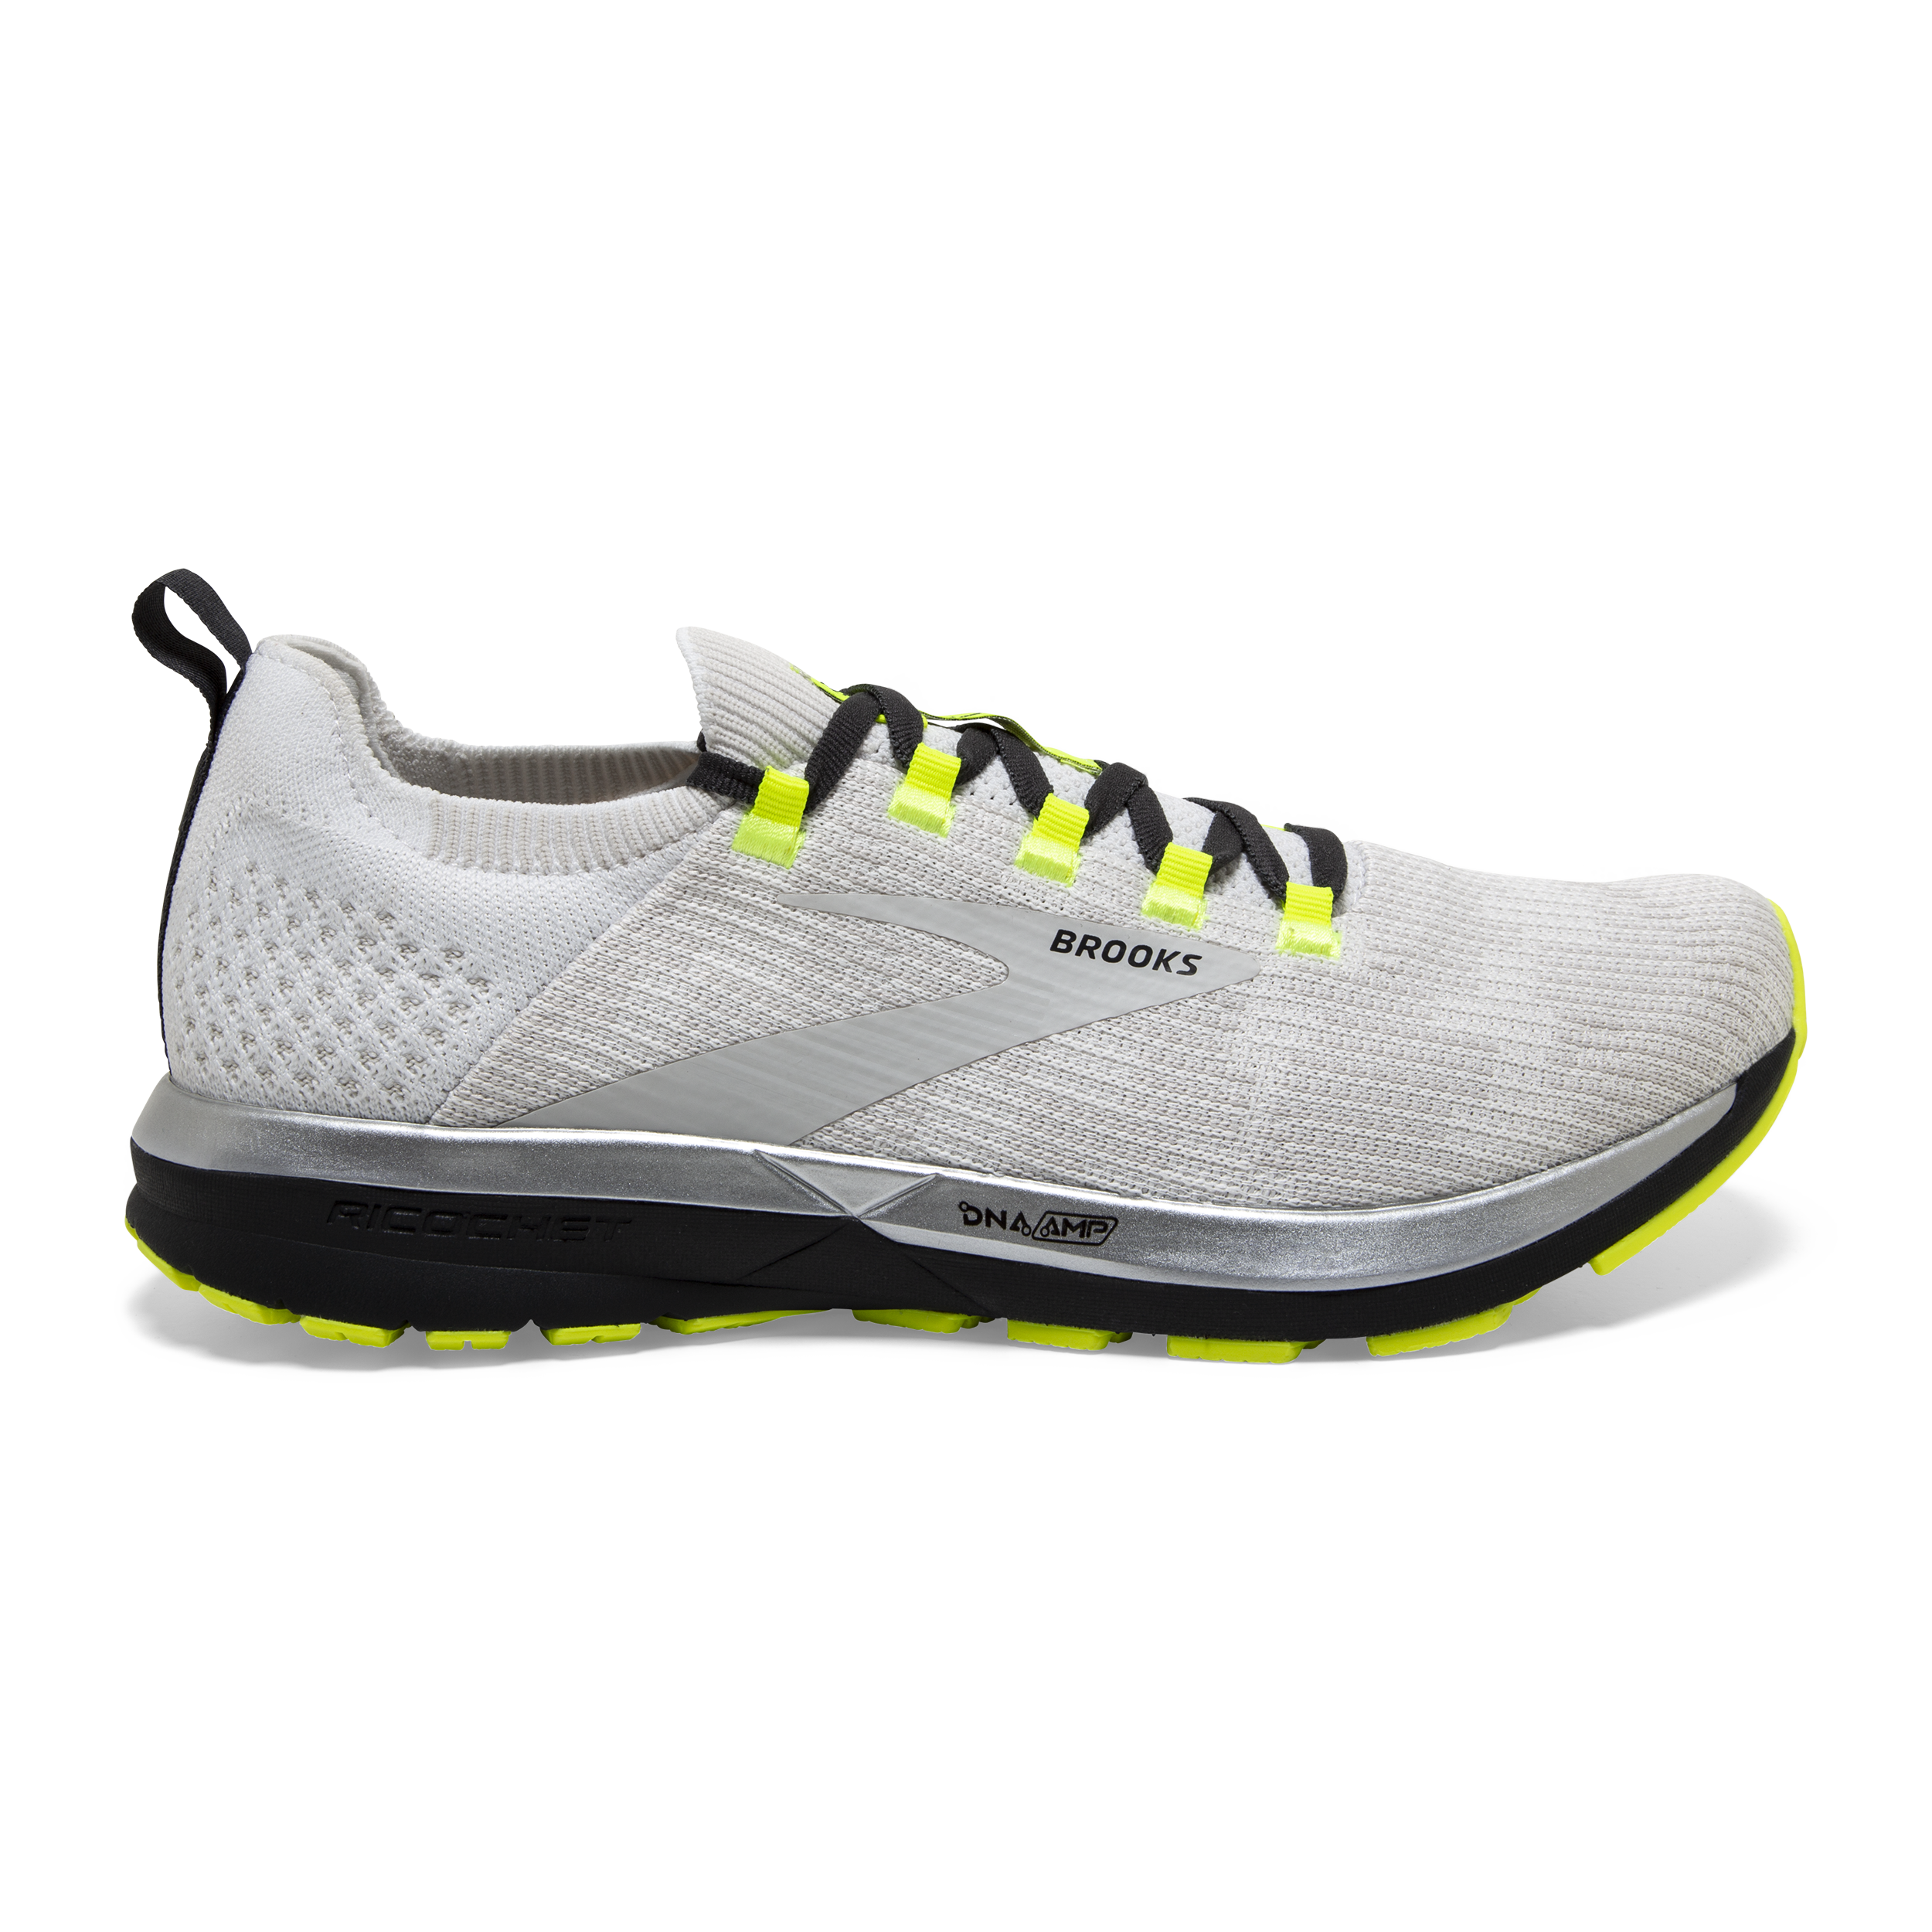 Brooks Ricochet 2 Review - Running Shoes 2020